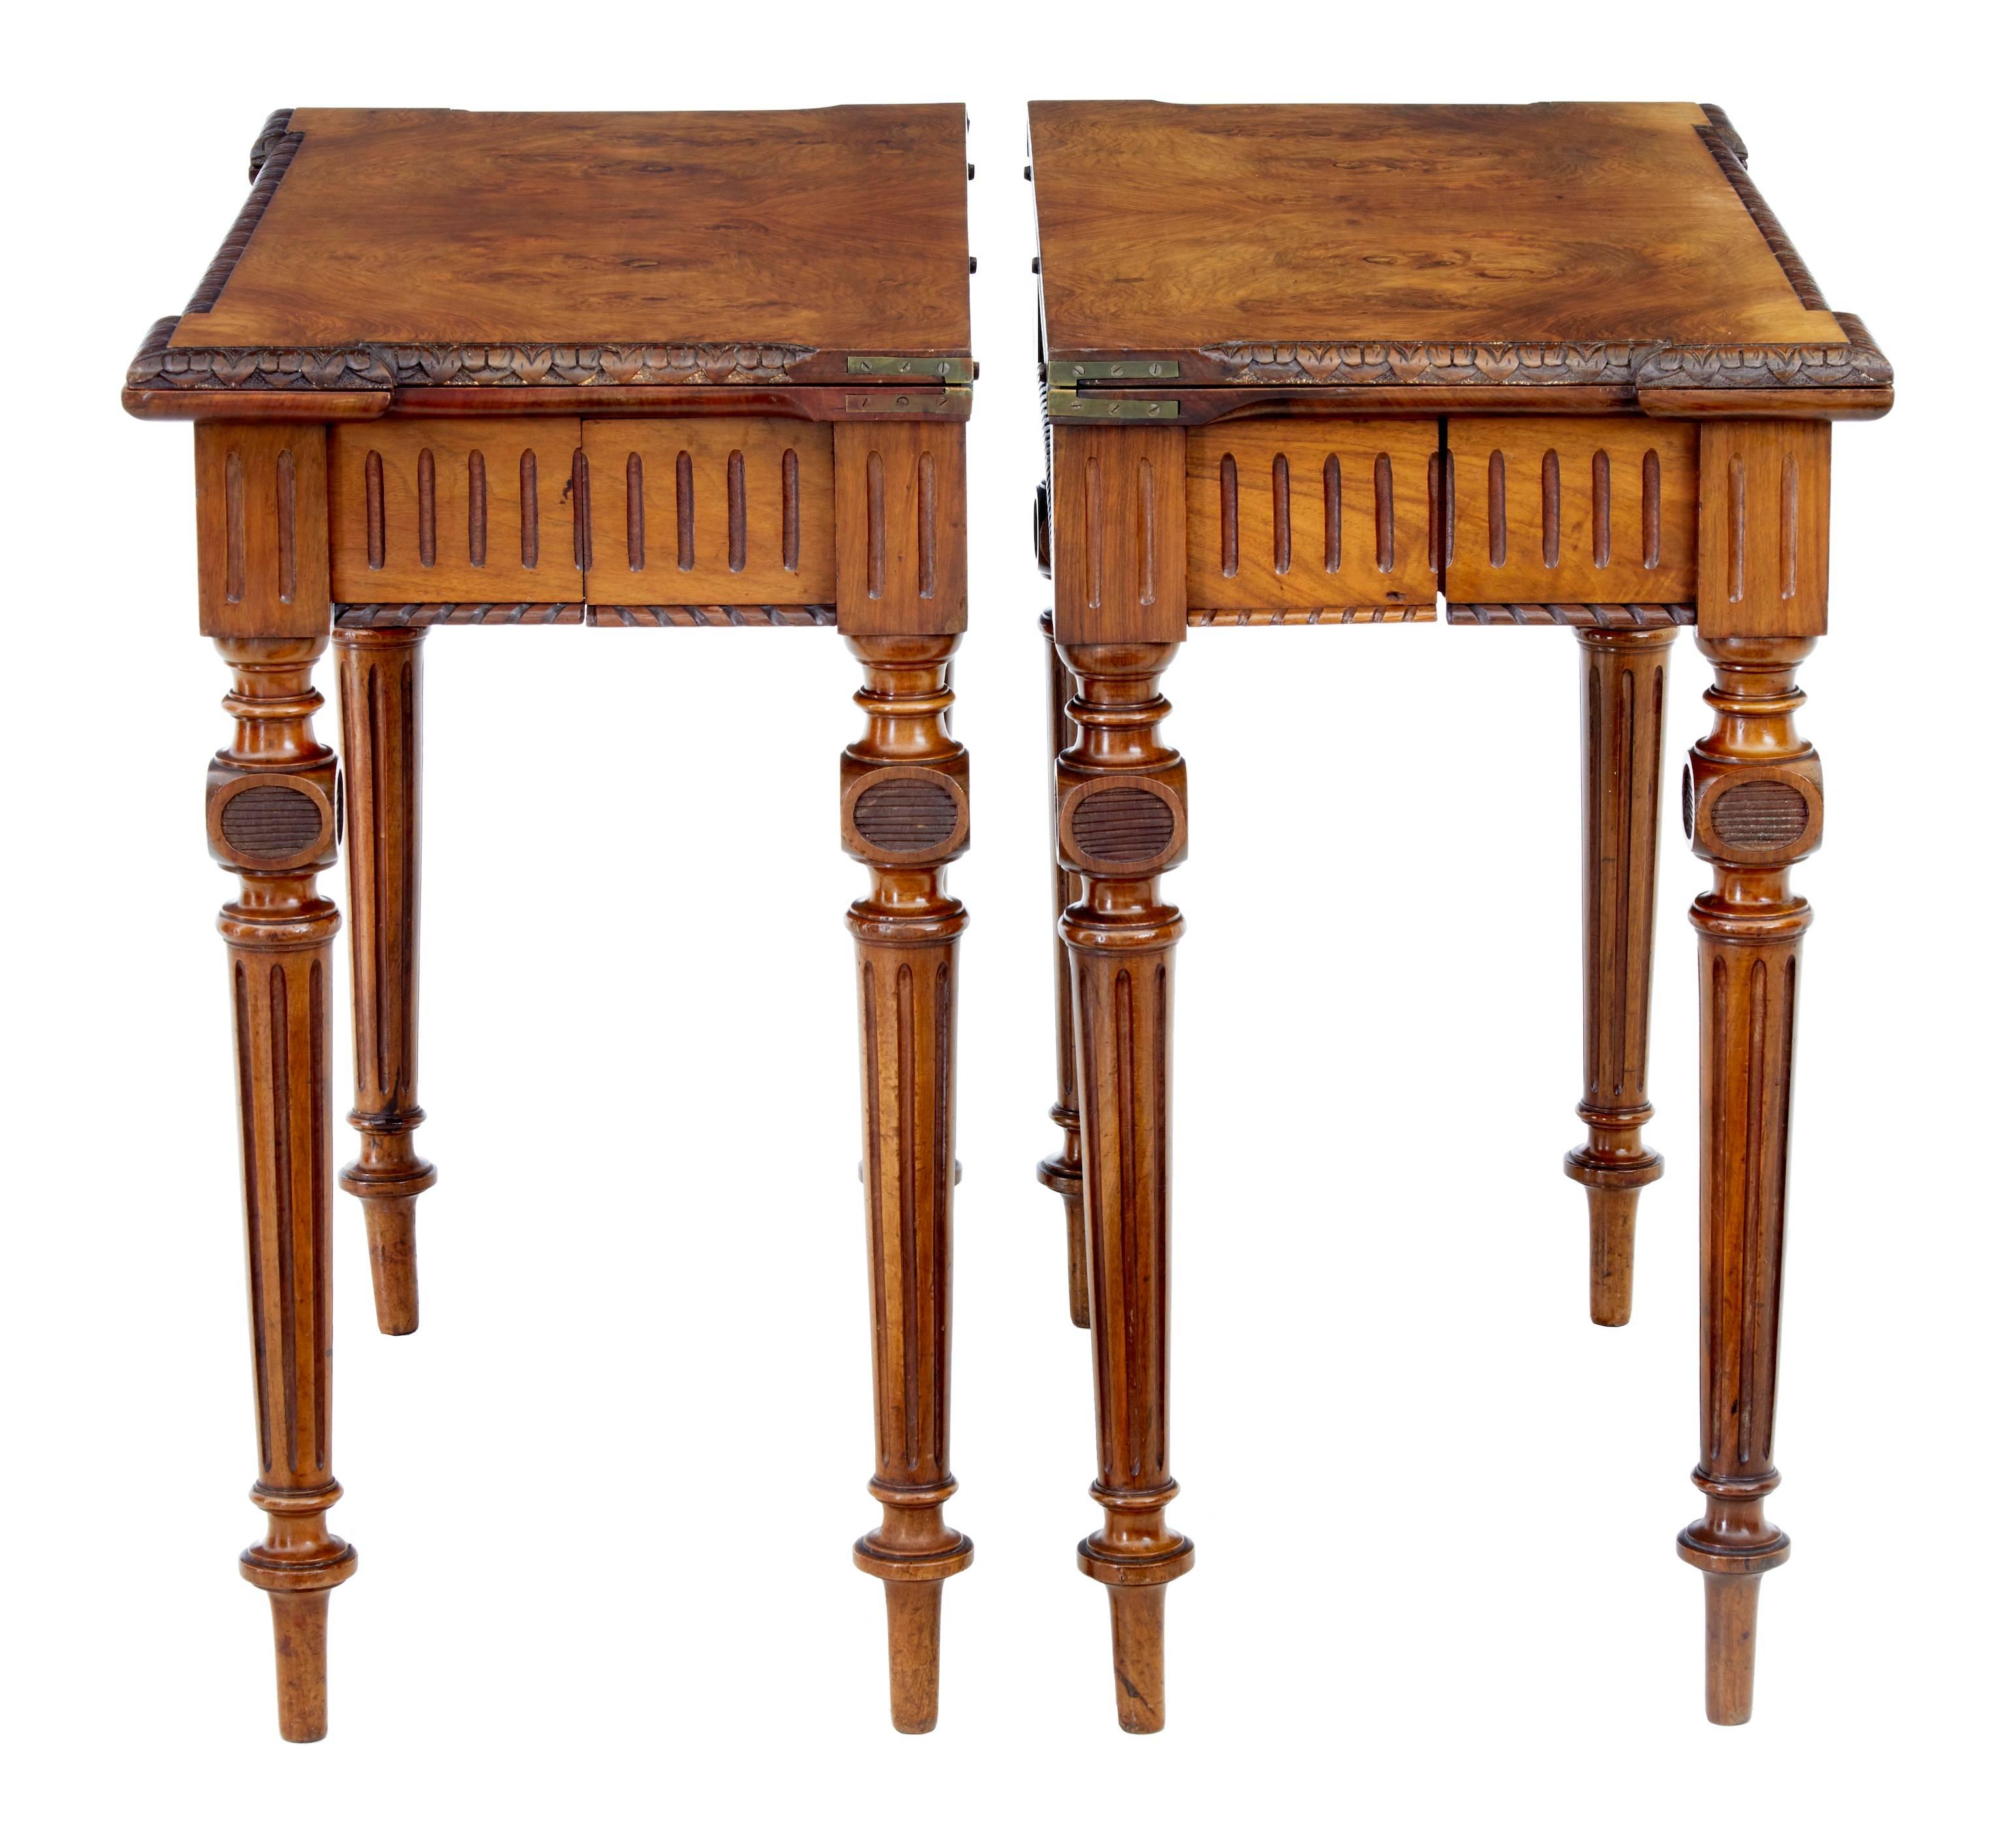 Pair of 19th century burr walnut tea tables, circa 1880.
Elegantly made with burr walnut veneers and striking matching veneers on the inside.
Carved canted edging.
Standing on turned and fluted legs.

Measures: Height 29 1/2